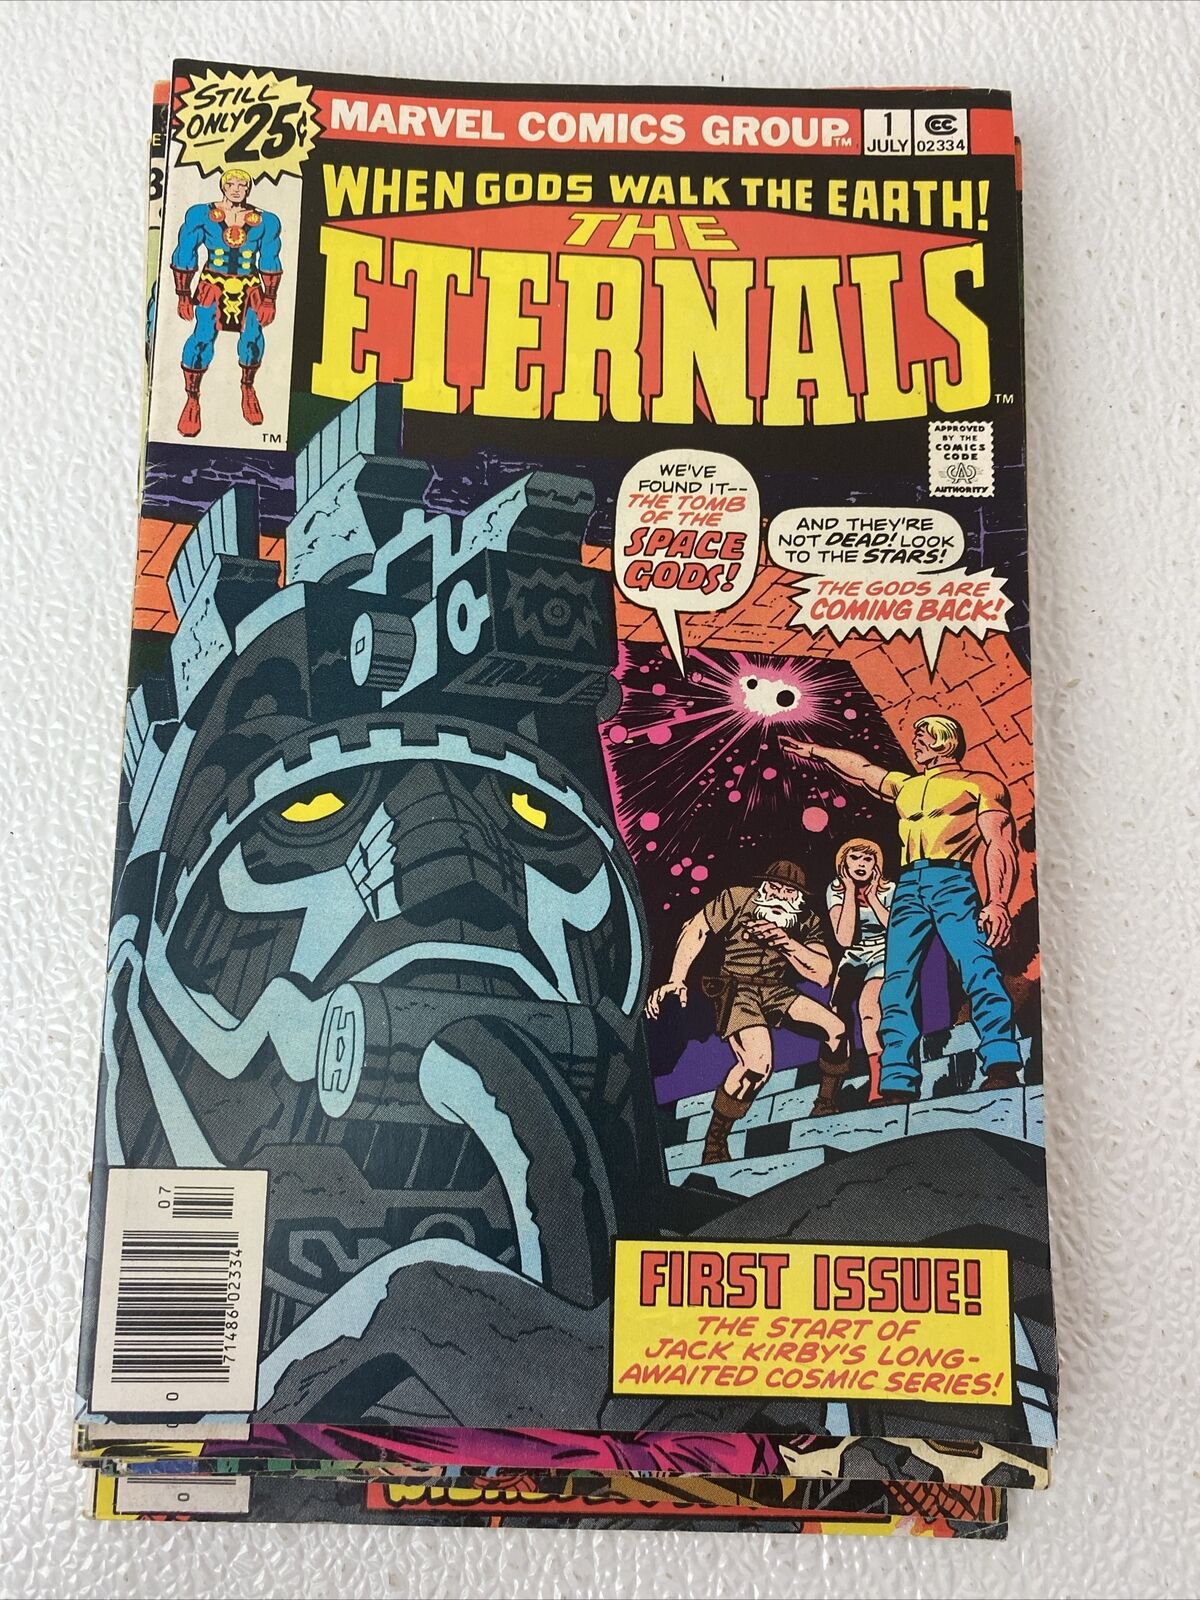 The Eternals Comic Books Lot Of 10 Marvel Comics Boarded 1,2,3,4,5,7,8,11,14,15